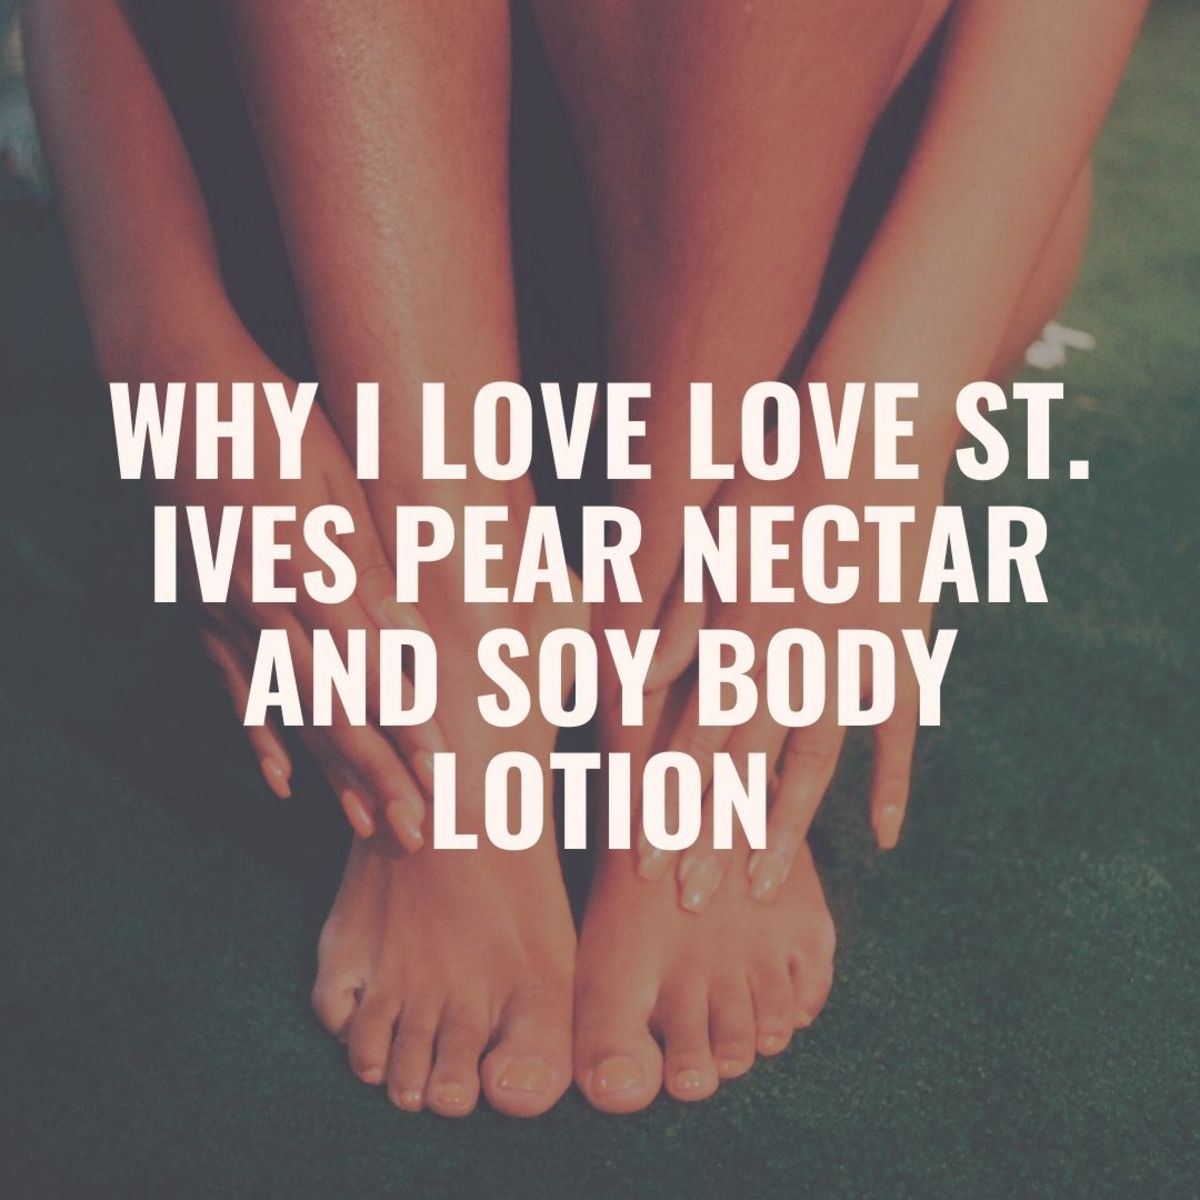 Refresh and revive with pear nectar and soy body lotion. St. Ives delivers an exceptional lotion sure to hydrate the driest of skin!